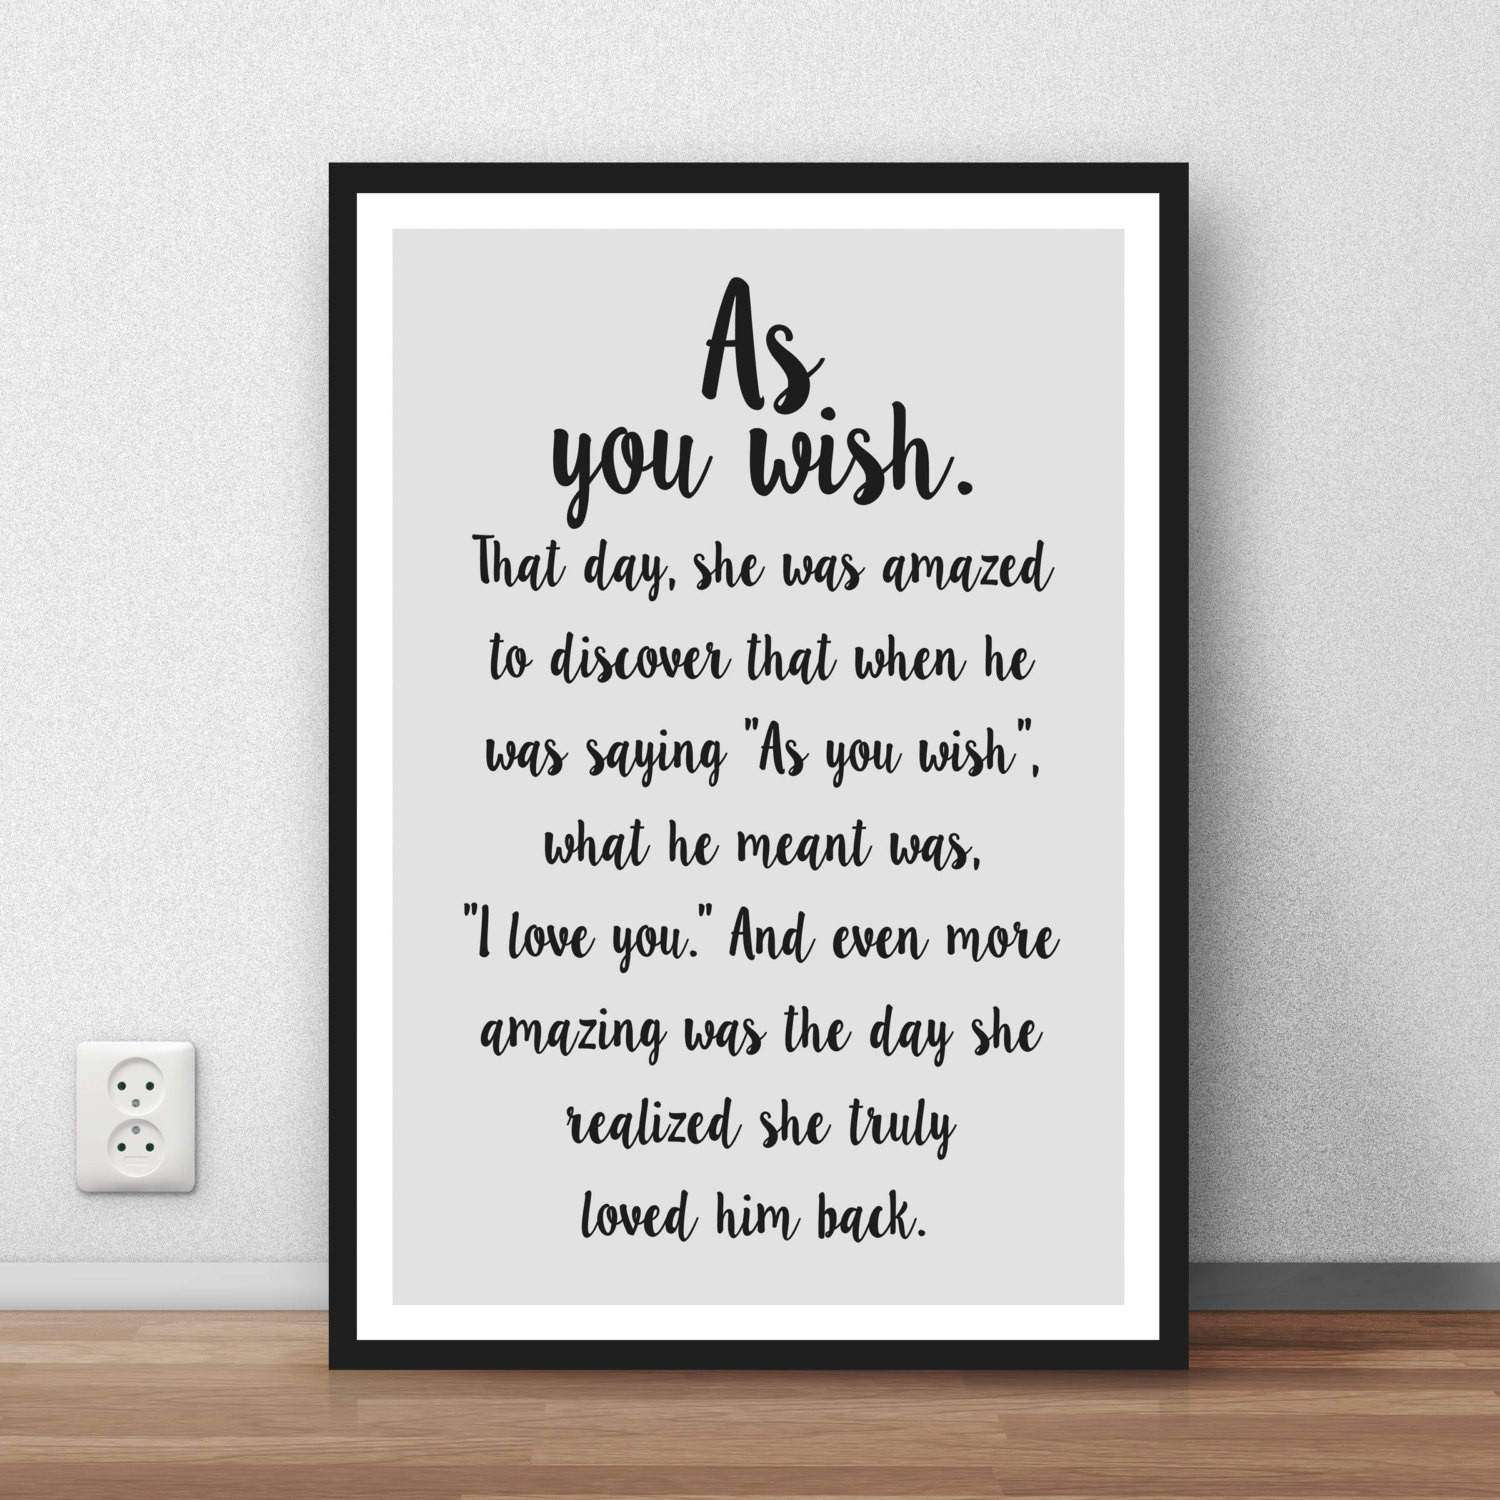 Princess Bride Marriage Quotes
 The Princess Bride quote As You Wish Great wall art poster